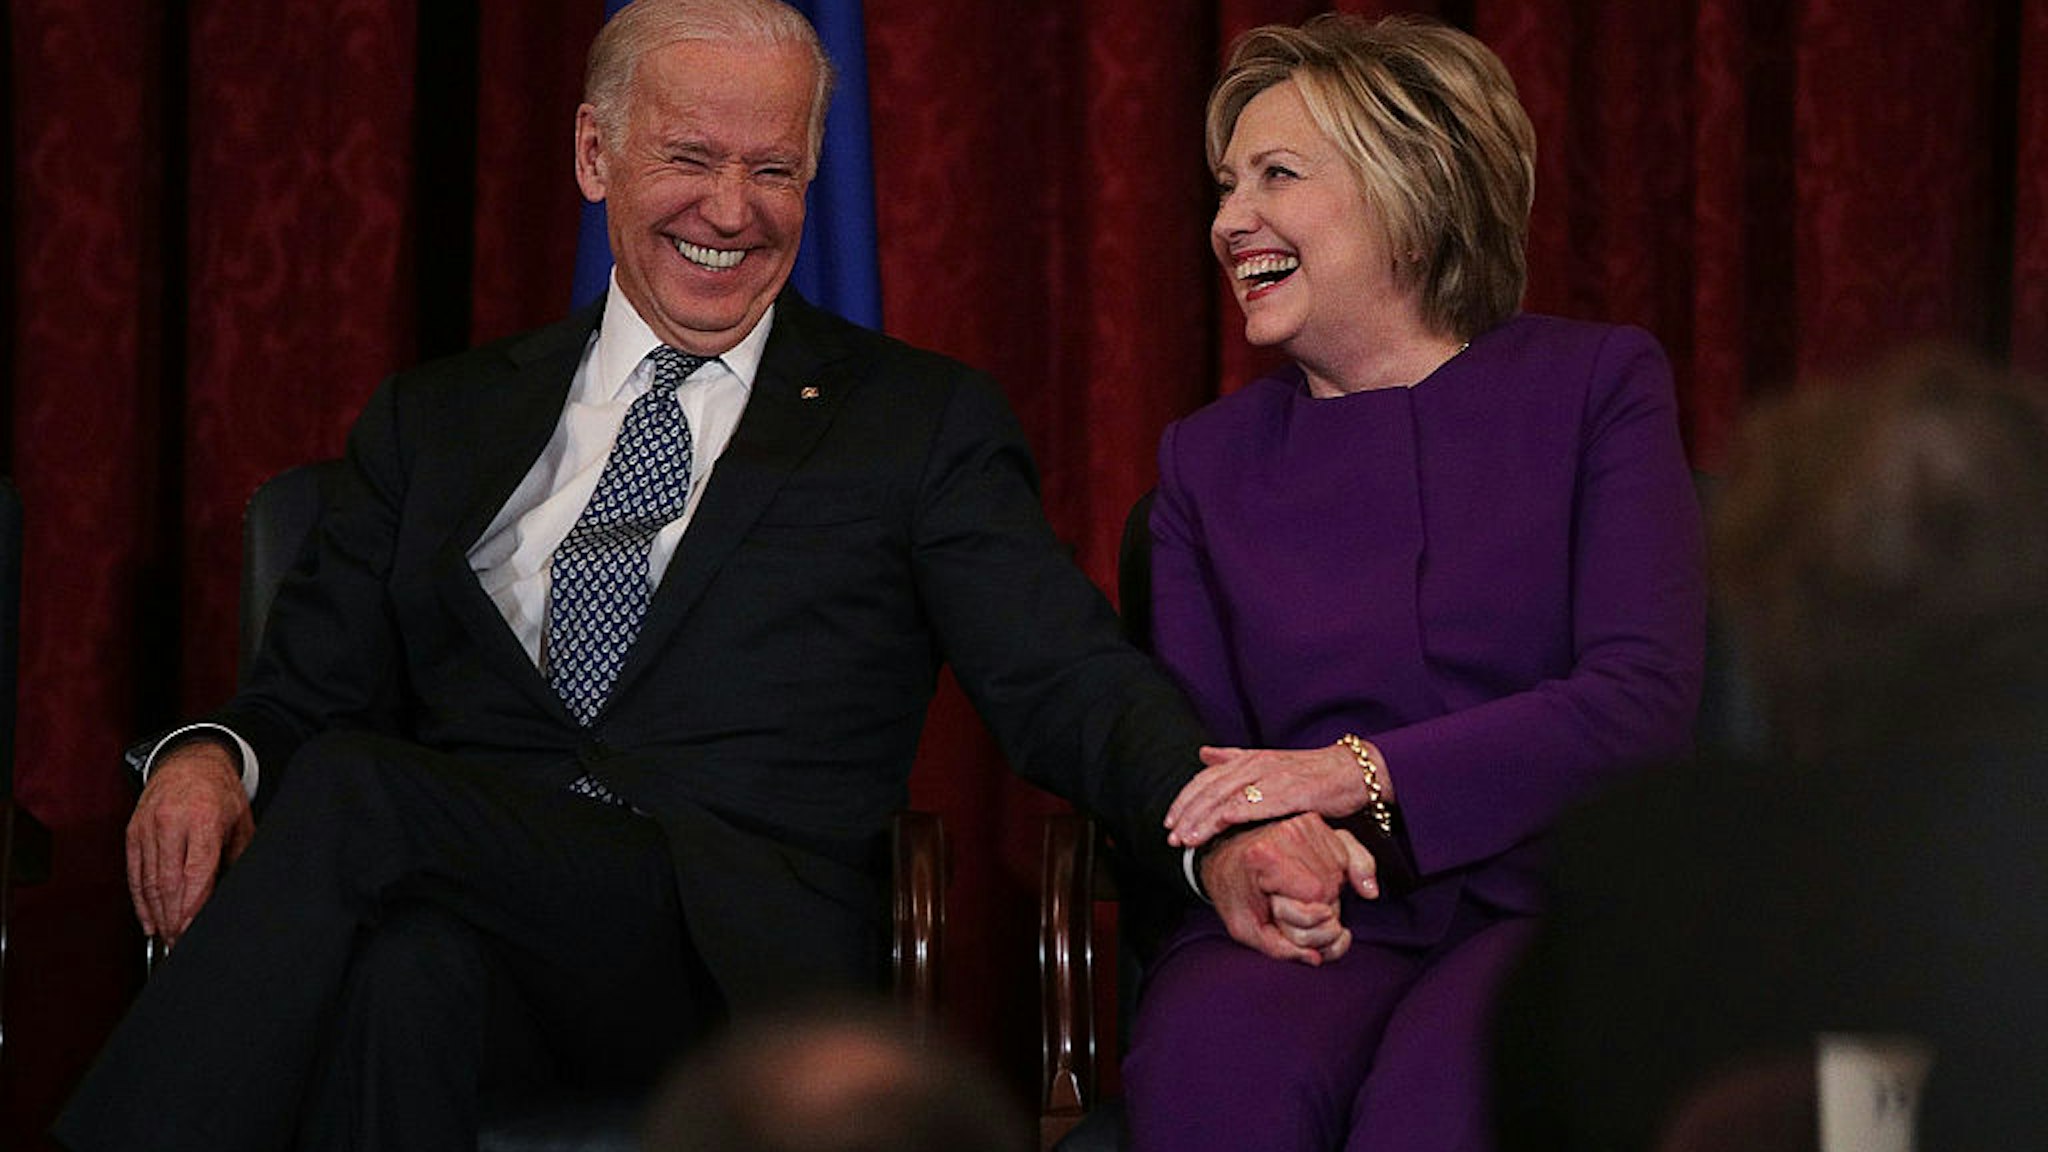 WASHINGTON, DC - DECEMBER 08: Former U.S. Secretary of State Hillary Clinton (R) shares a moment with Vice President Joseph Biden (L) during a leadership portrait unveiling ceremony for Senate Minority Leader Sen. Harry Reid (D-NV) December 8, 2016 on Capitol Hill in Washington, DC. The leadership portrait unveiling ceremony was held to honor the outgoing Democratic leader. (Photo by Alex Wong/Getty Images)